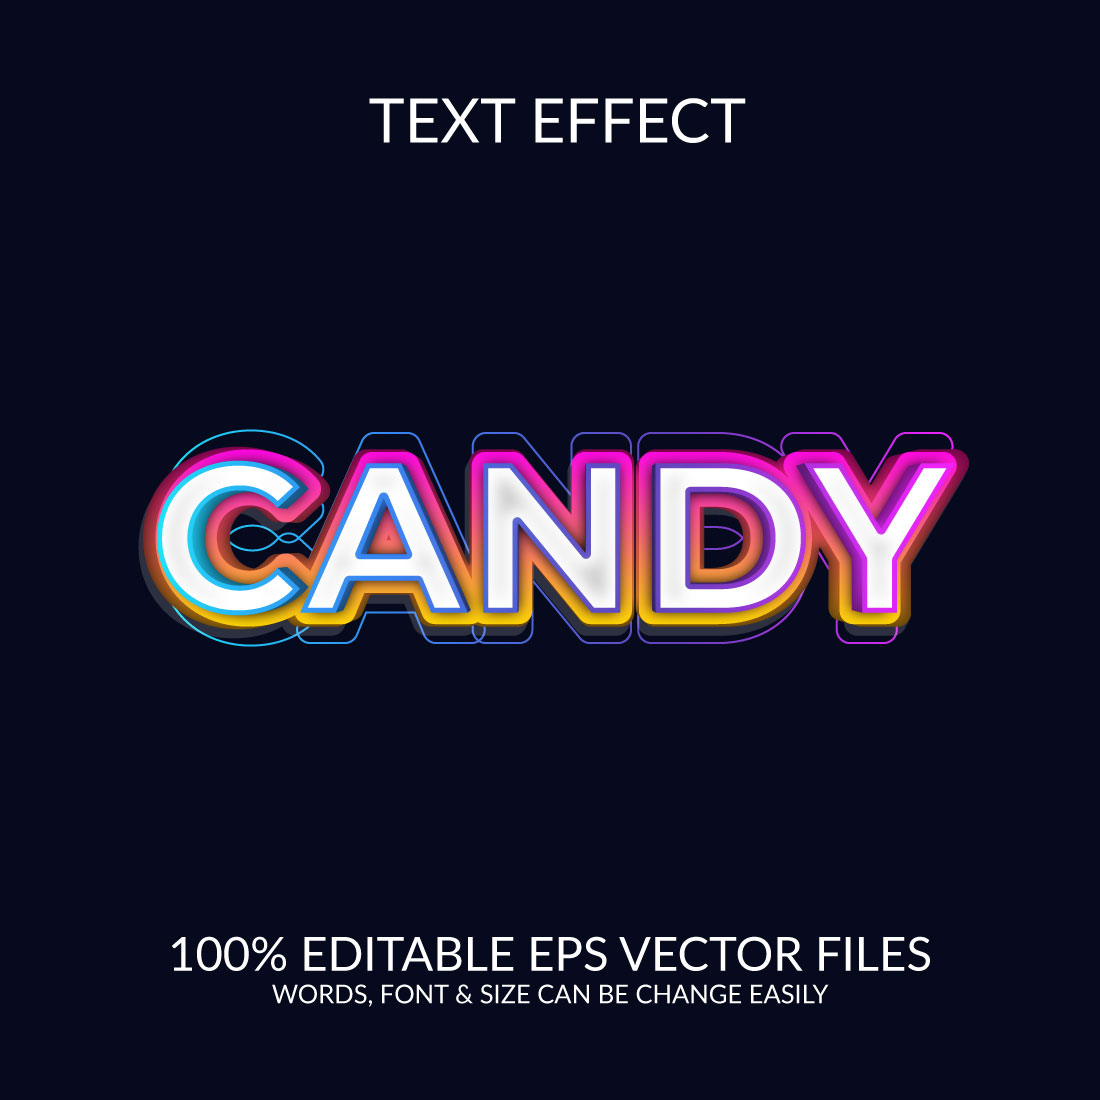 Candy 3d editable text effect template cover image.